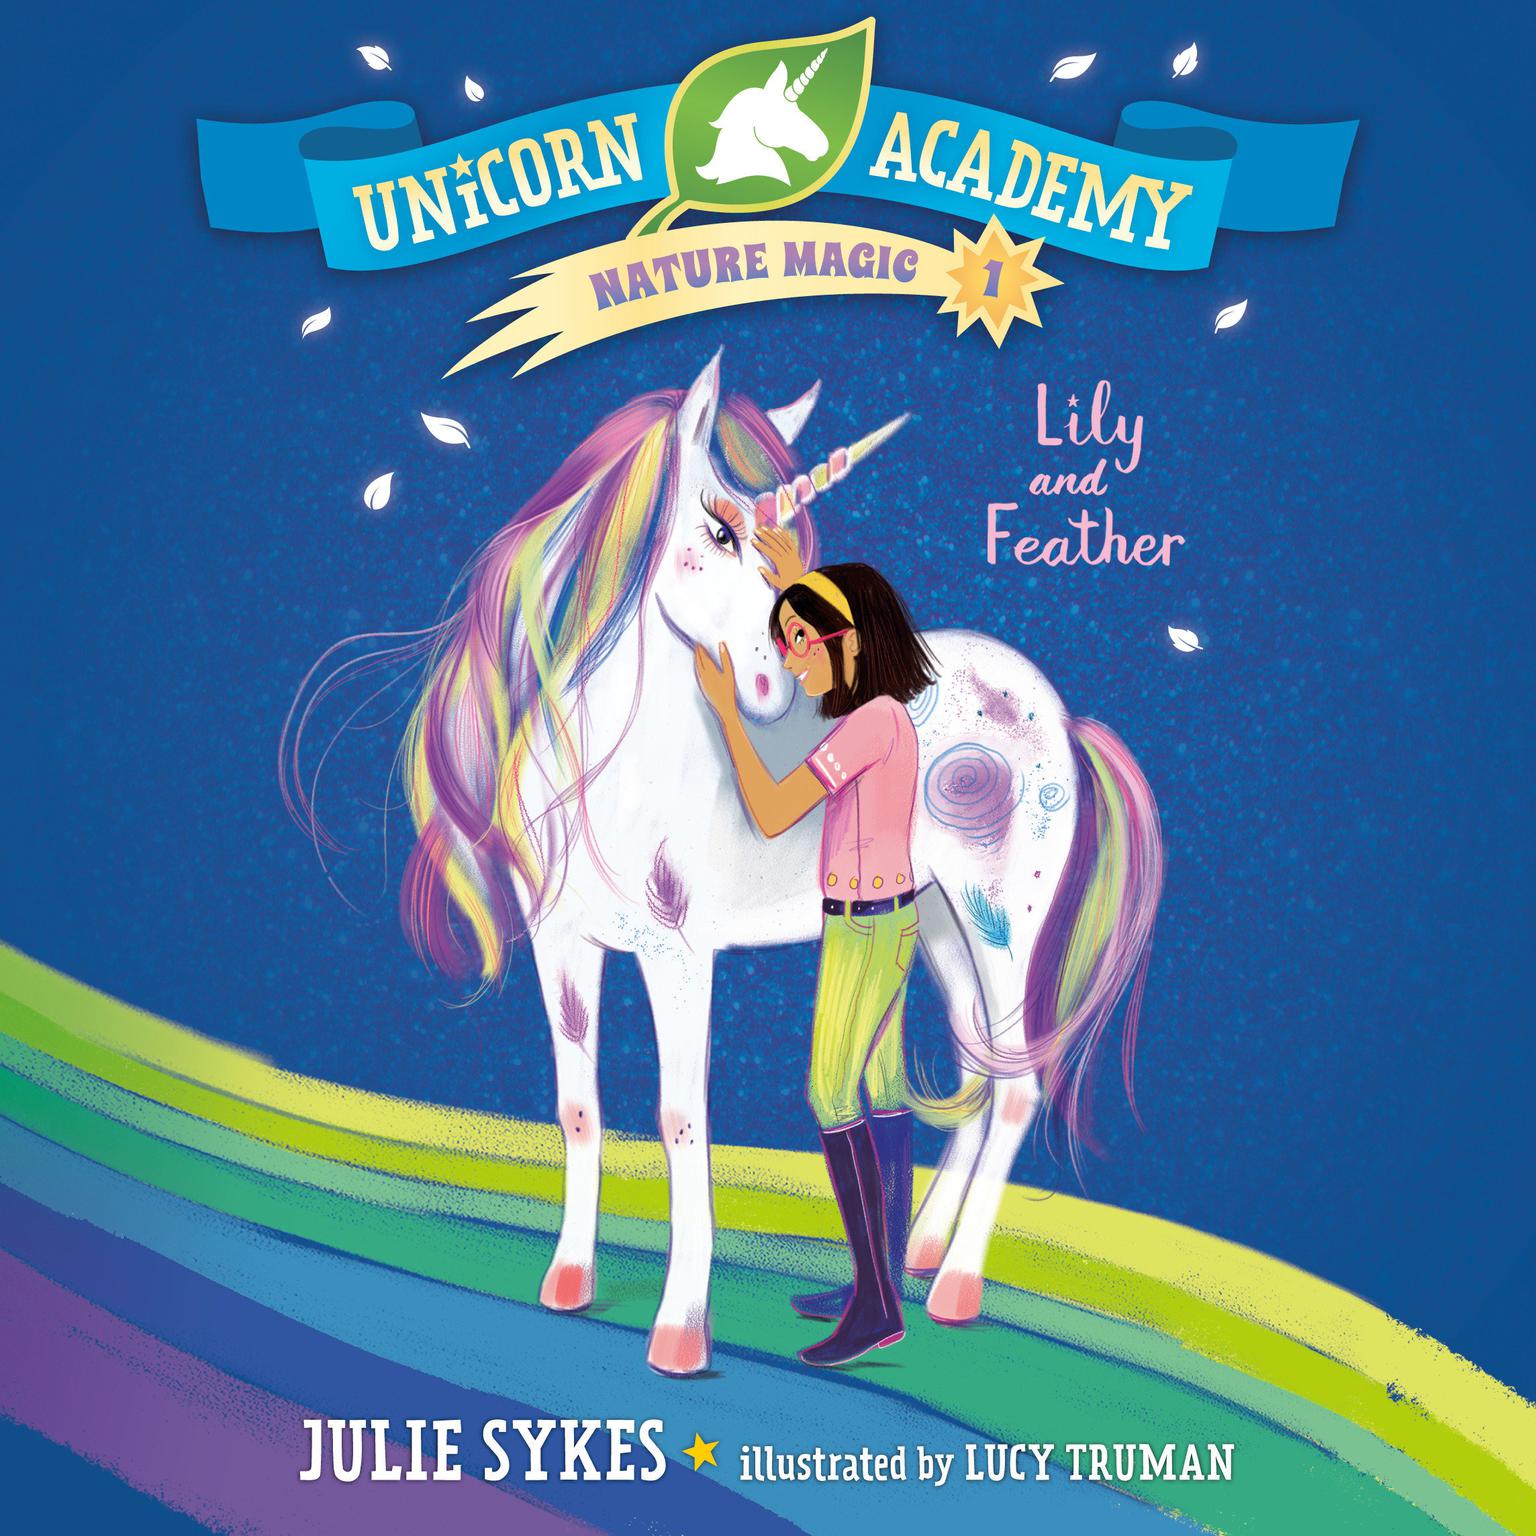 Unicorn Academy Nature Magic #1: Lily and Feather Audiobook, by Julie Sykes